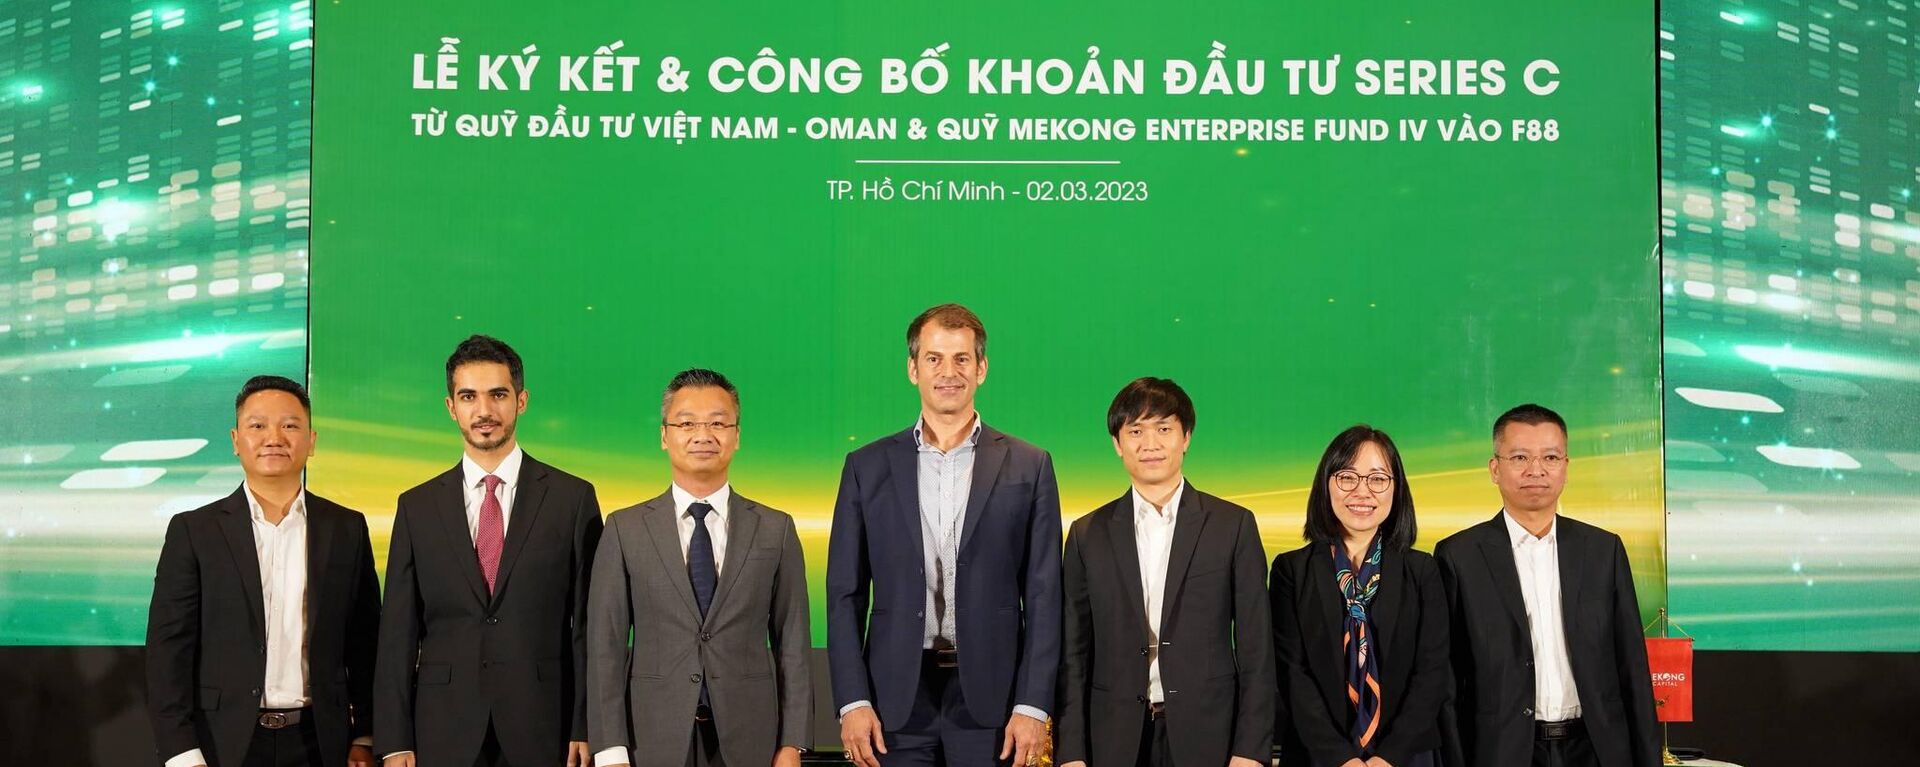 F88 Investment JSC announced that it successfully raised a Series C investment of $50 million. The two main investors in this round are Vietnam-Oman Investment Fund and the Mekong Enterprise Fund IV. - Sputnik Việt Nam, 1920, 09.03.2023